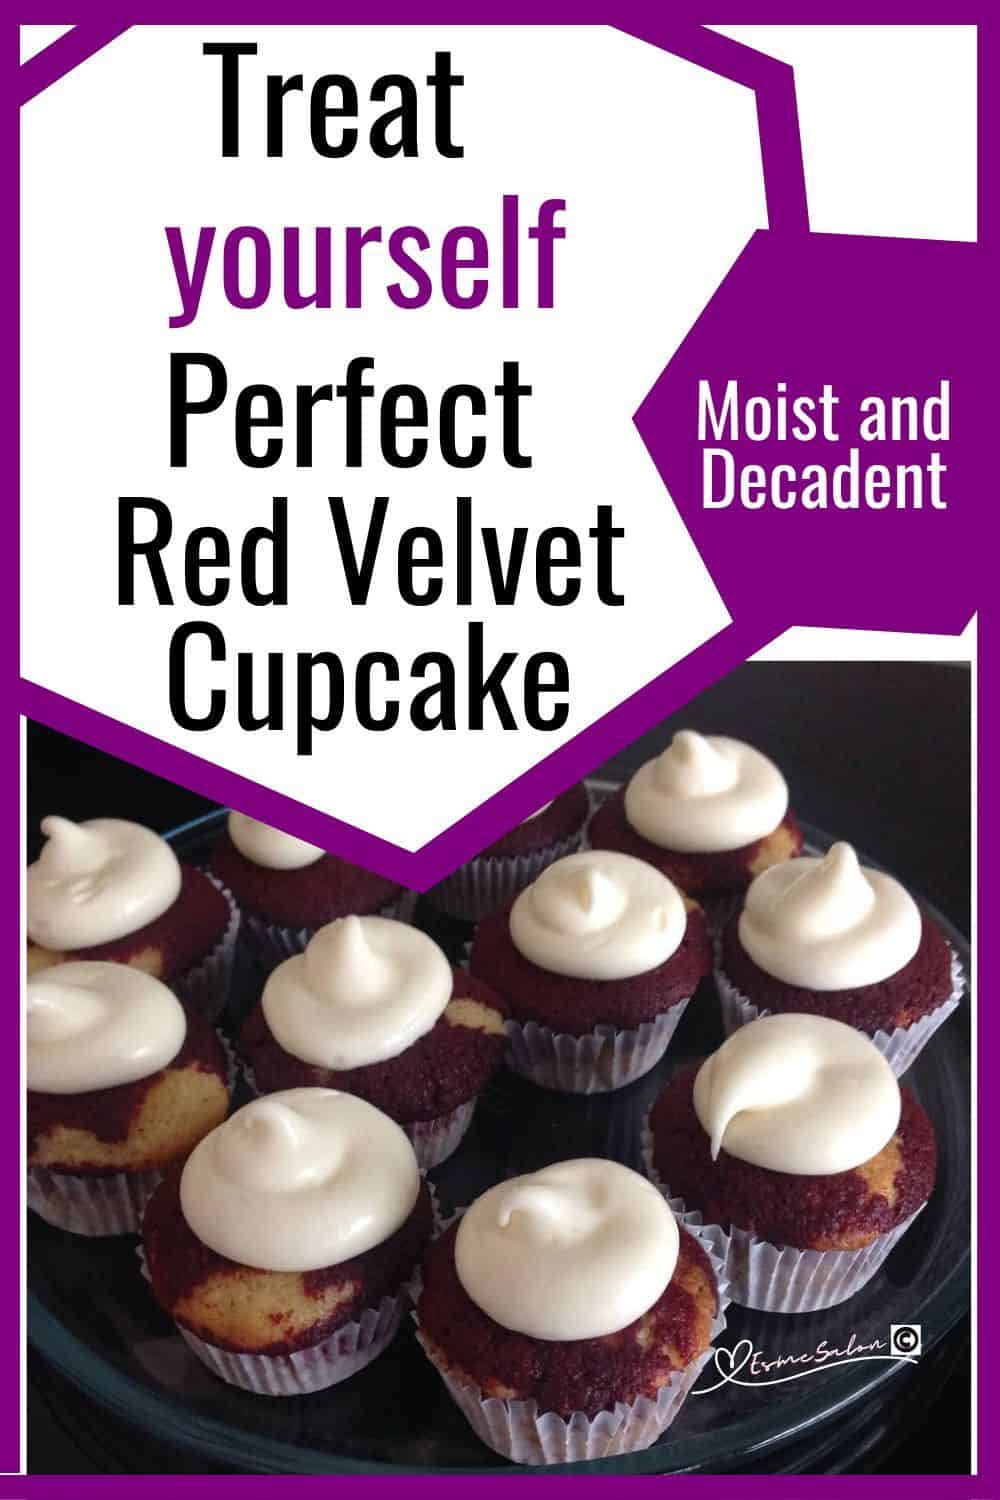 an image of Red Velvet Cupcakes with cream topping